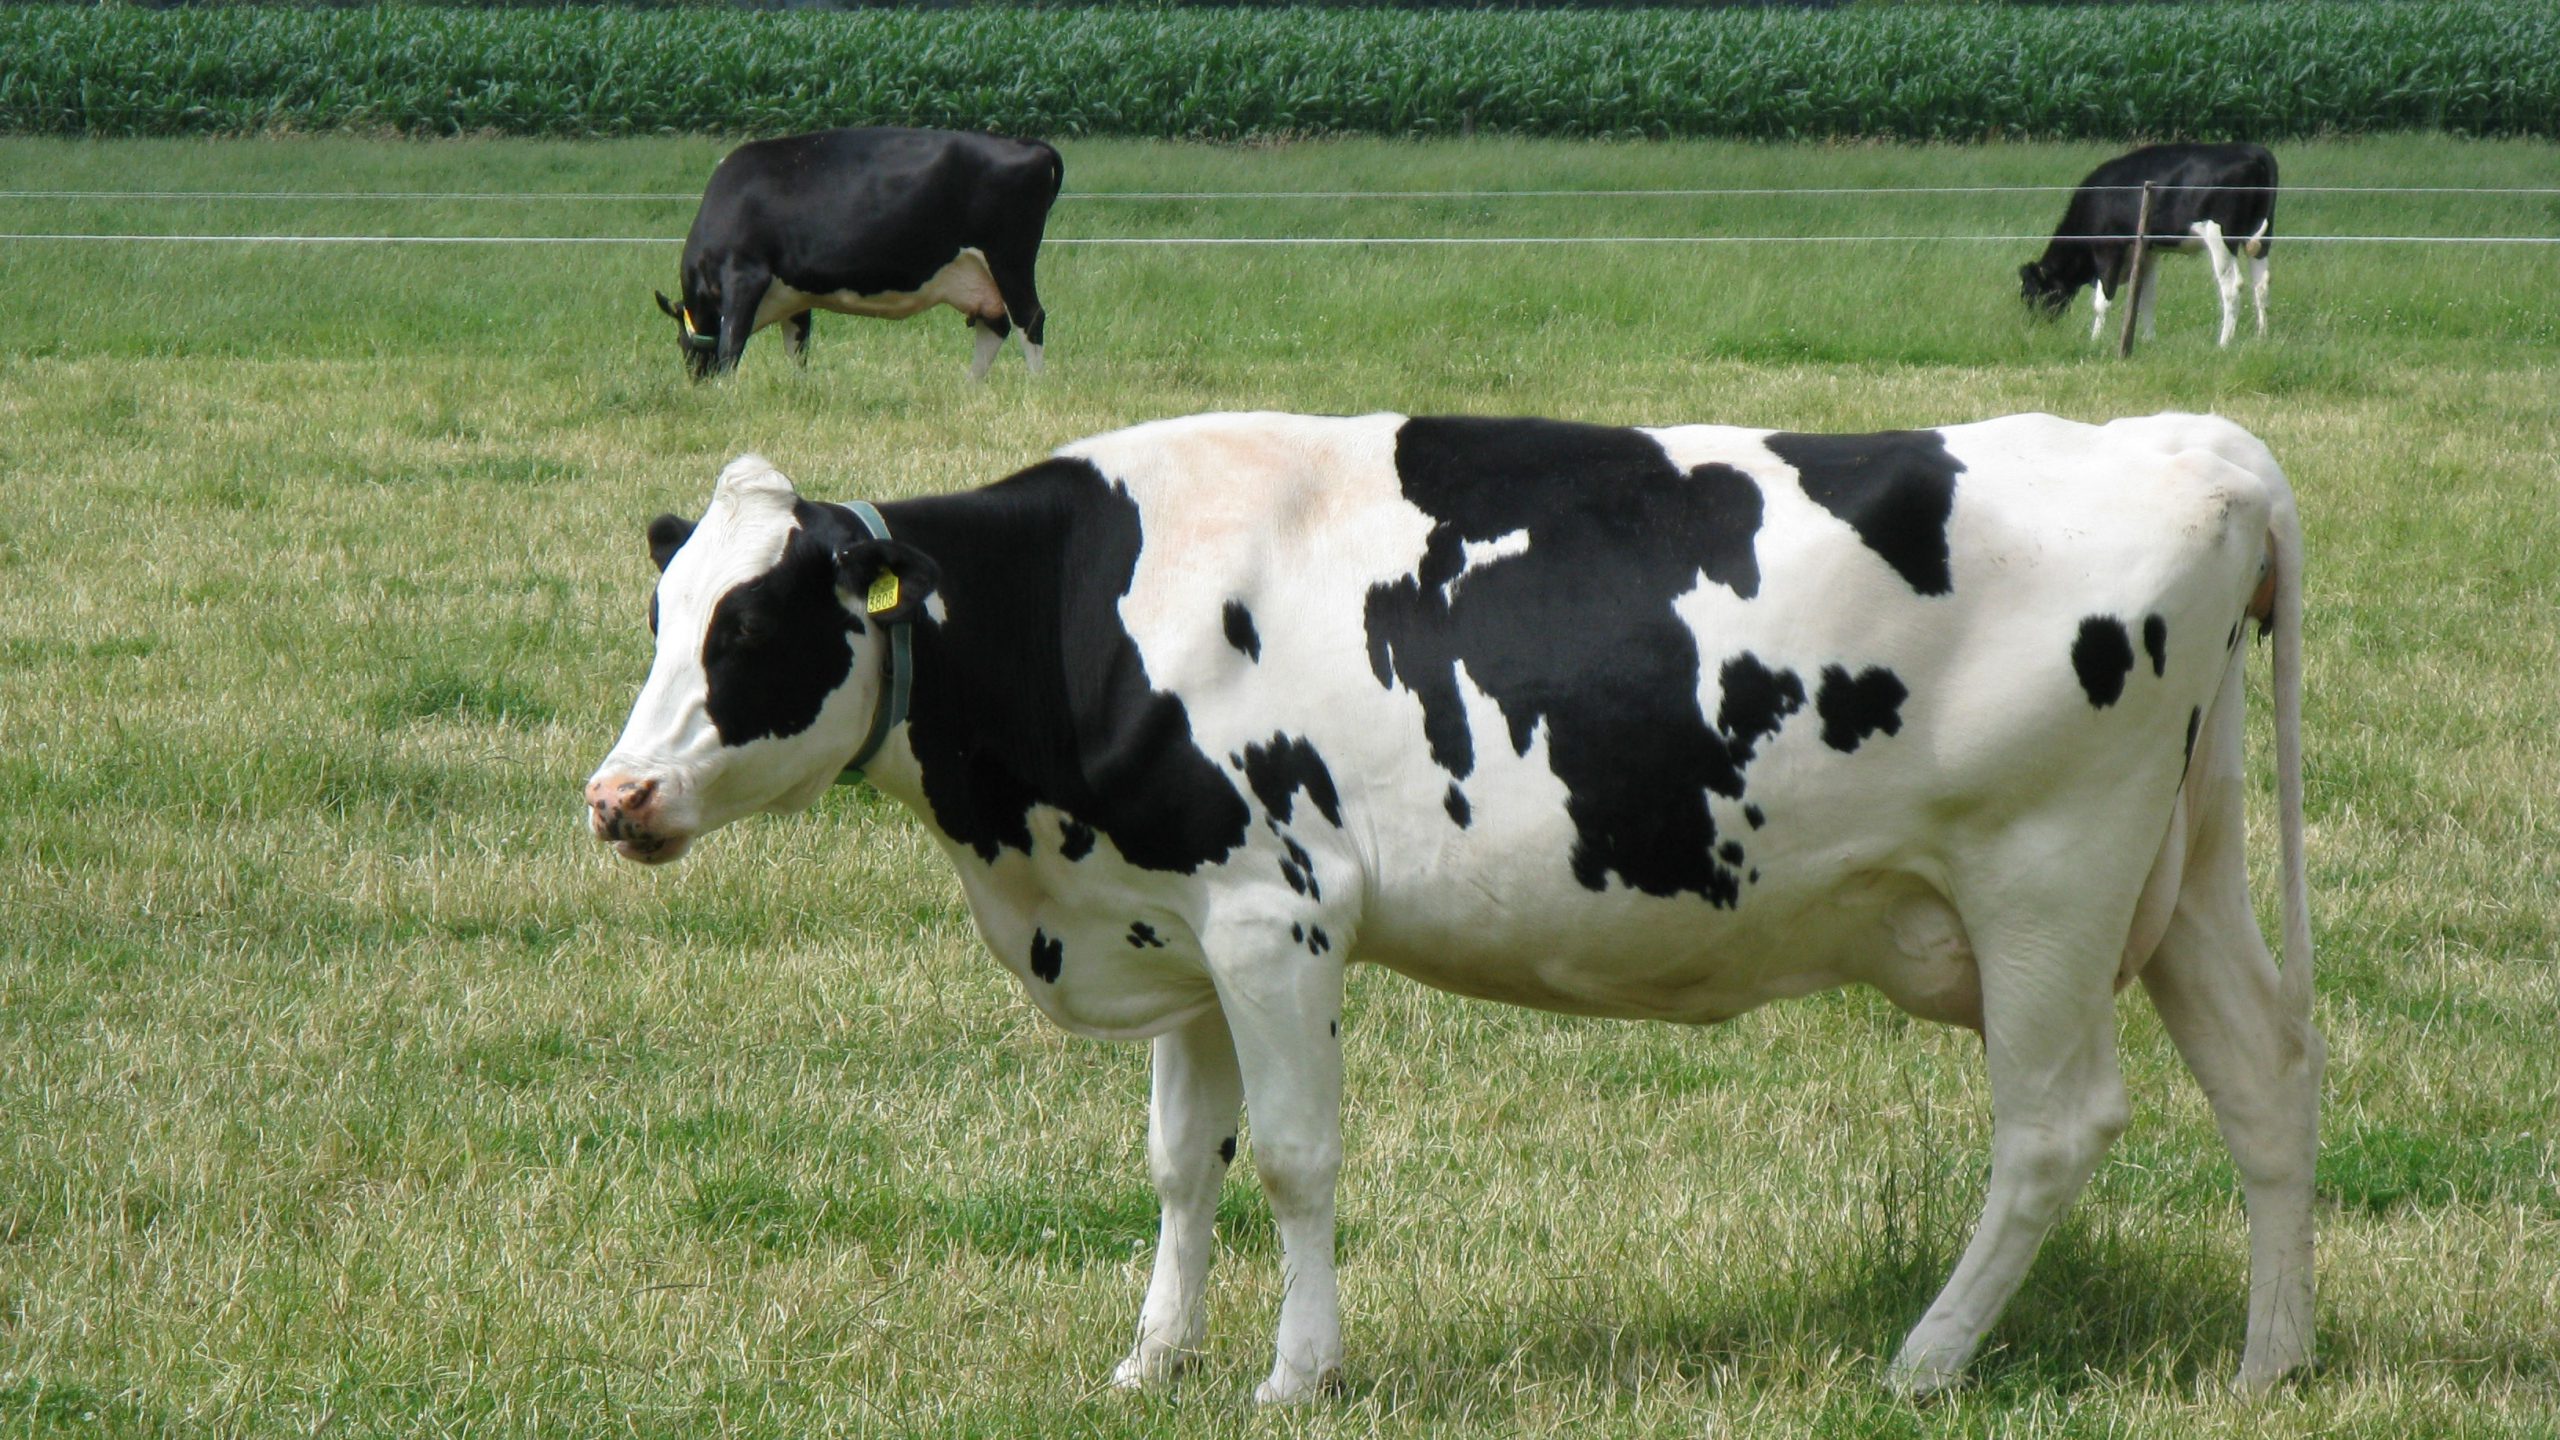 Cow Simulator 2014 Announced, Apparently Seriously